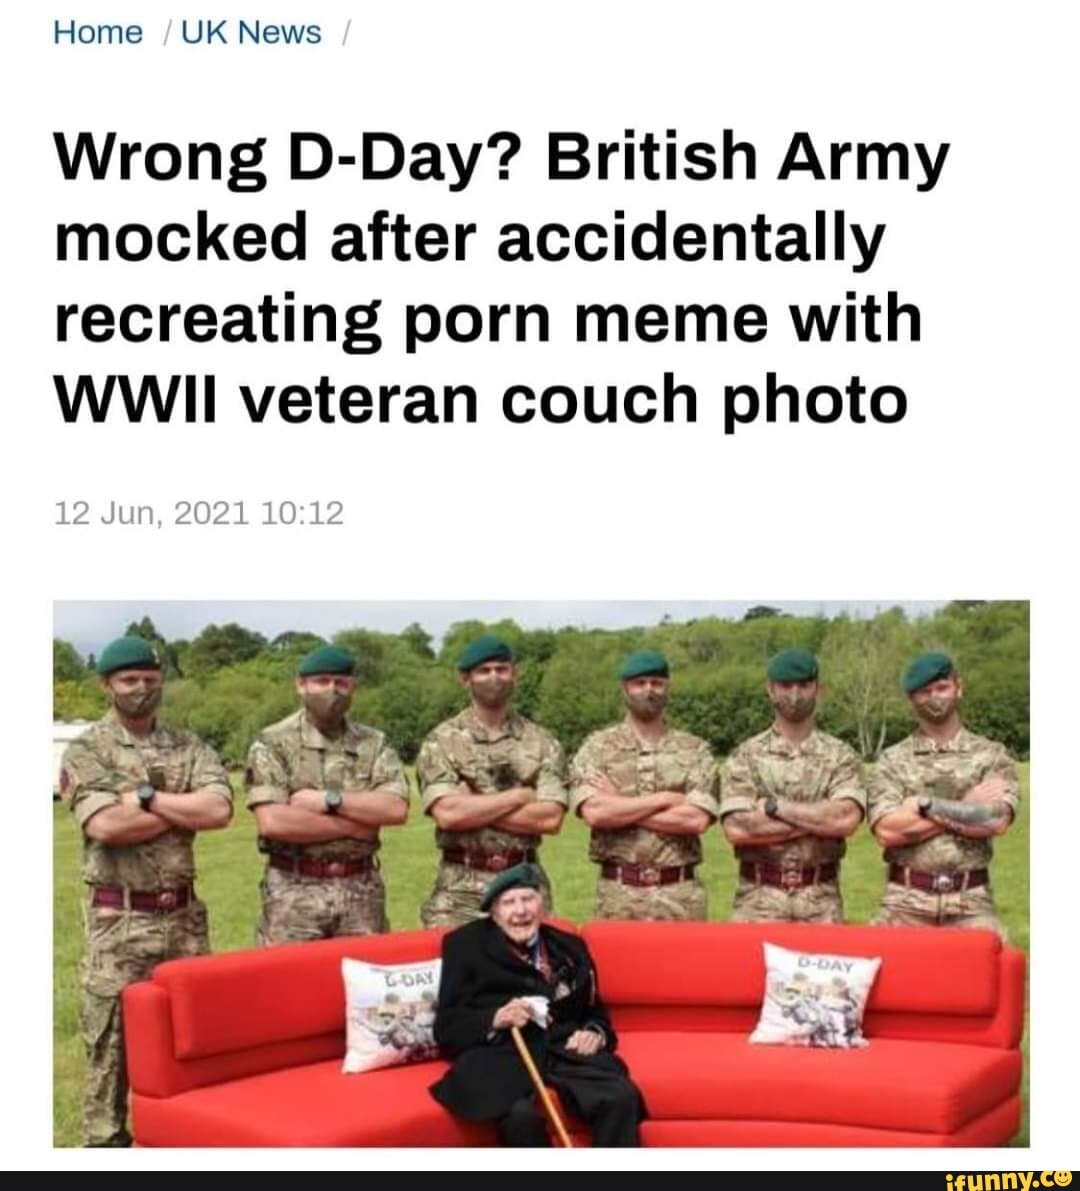 1080px x 1191px - Home /UK News / Wrong D-Day? British Army mocked after accidentally  recreating porn meme with WWII veteran couch photo 12 Jun, 2021 - iFunny